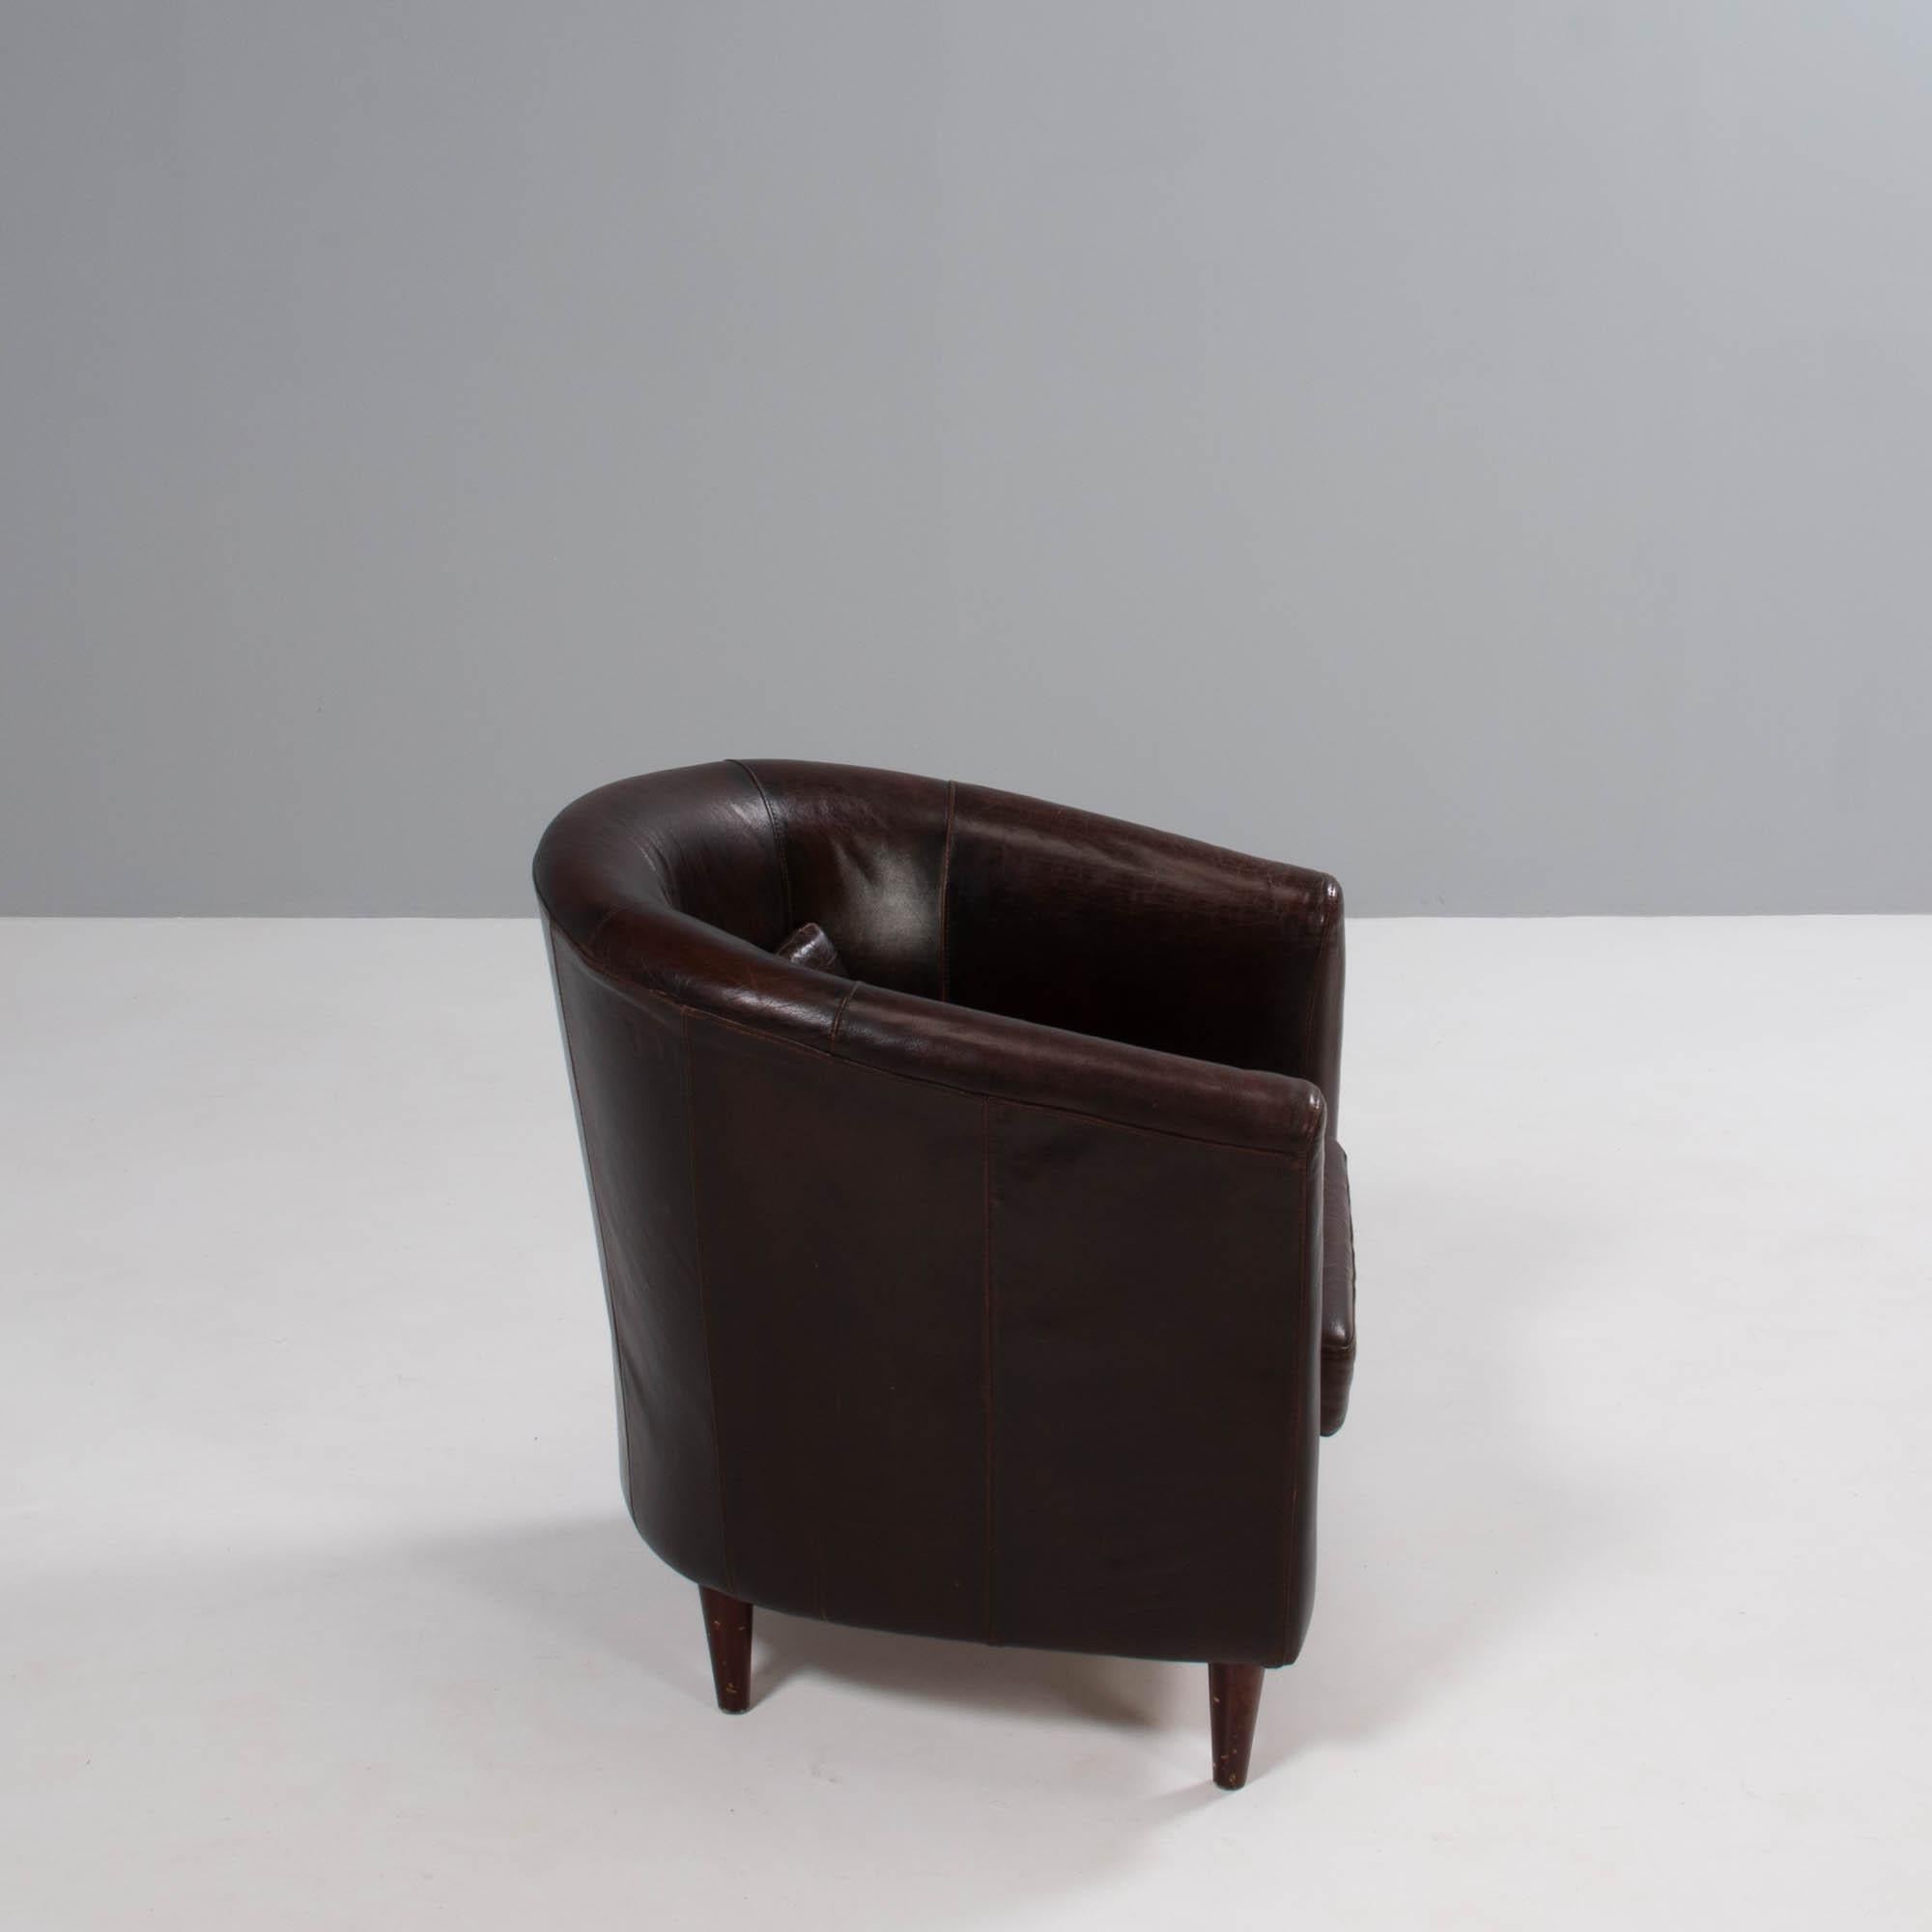 A pair of vintage tub chairs, fully upholstered in dark brown leather with wooden feet.

The chairs have curved backrests and integrated arms, creating the tub silhouette with a seat cushion and additional back cushion for extra comfort.

A